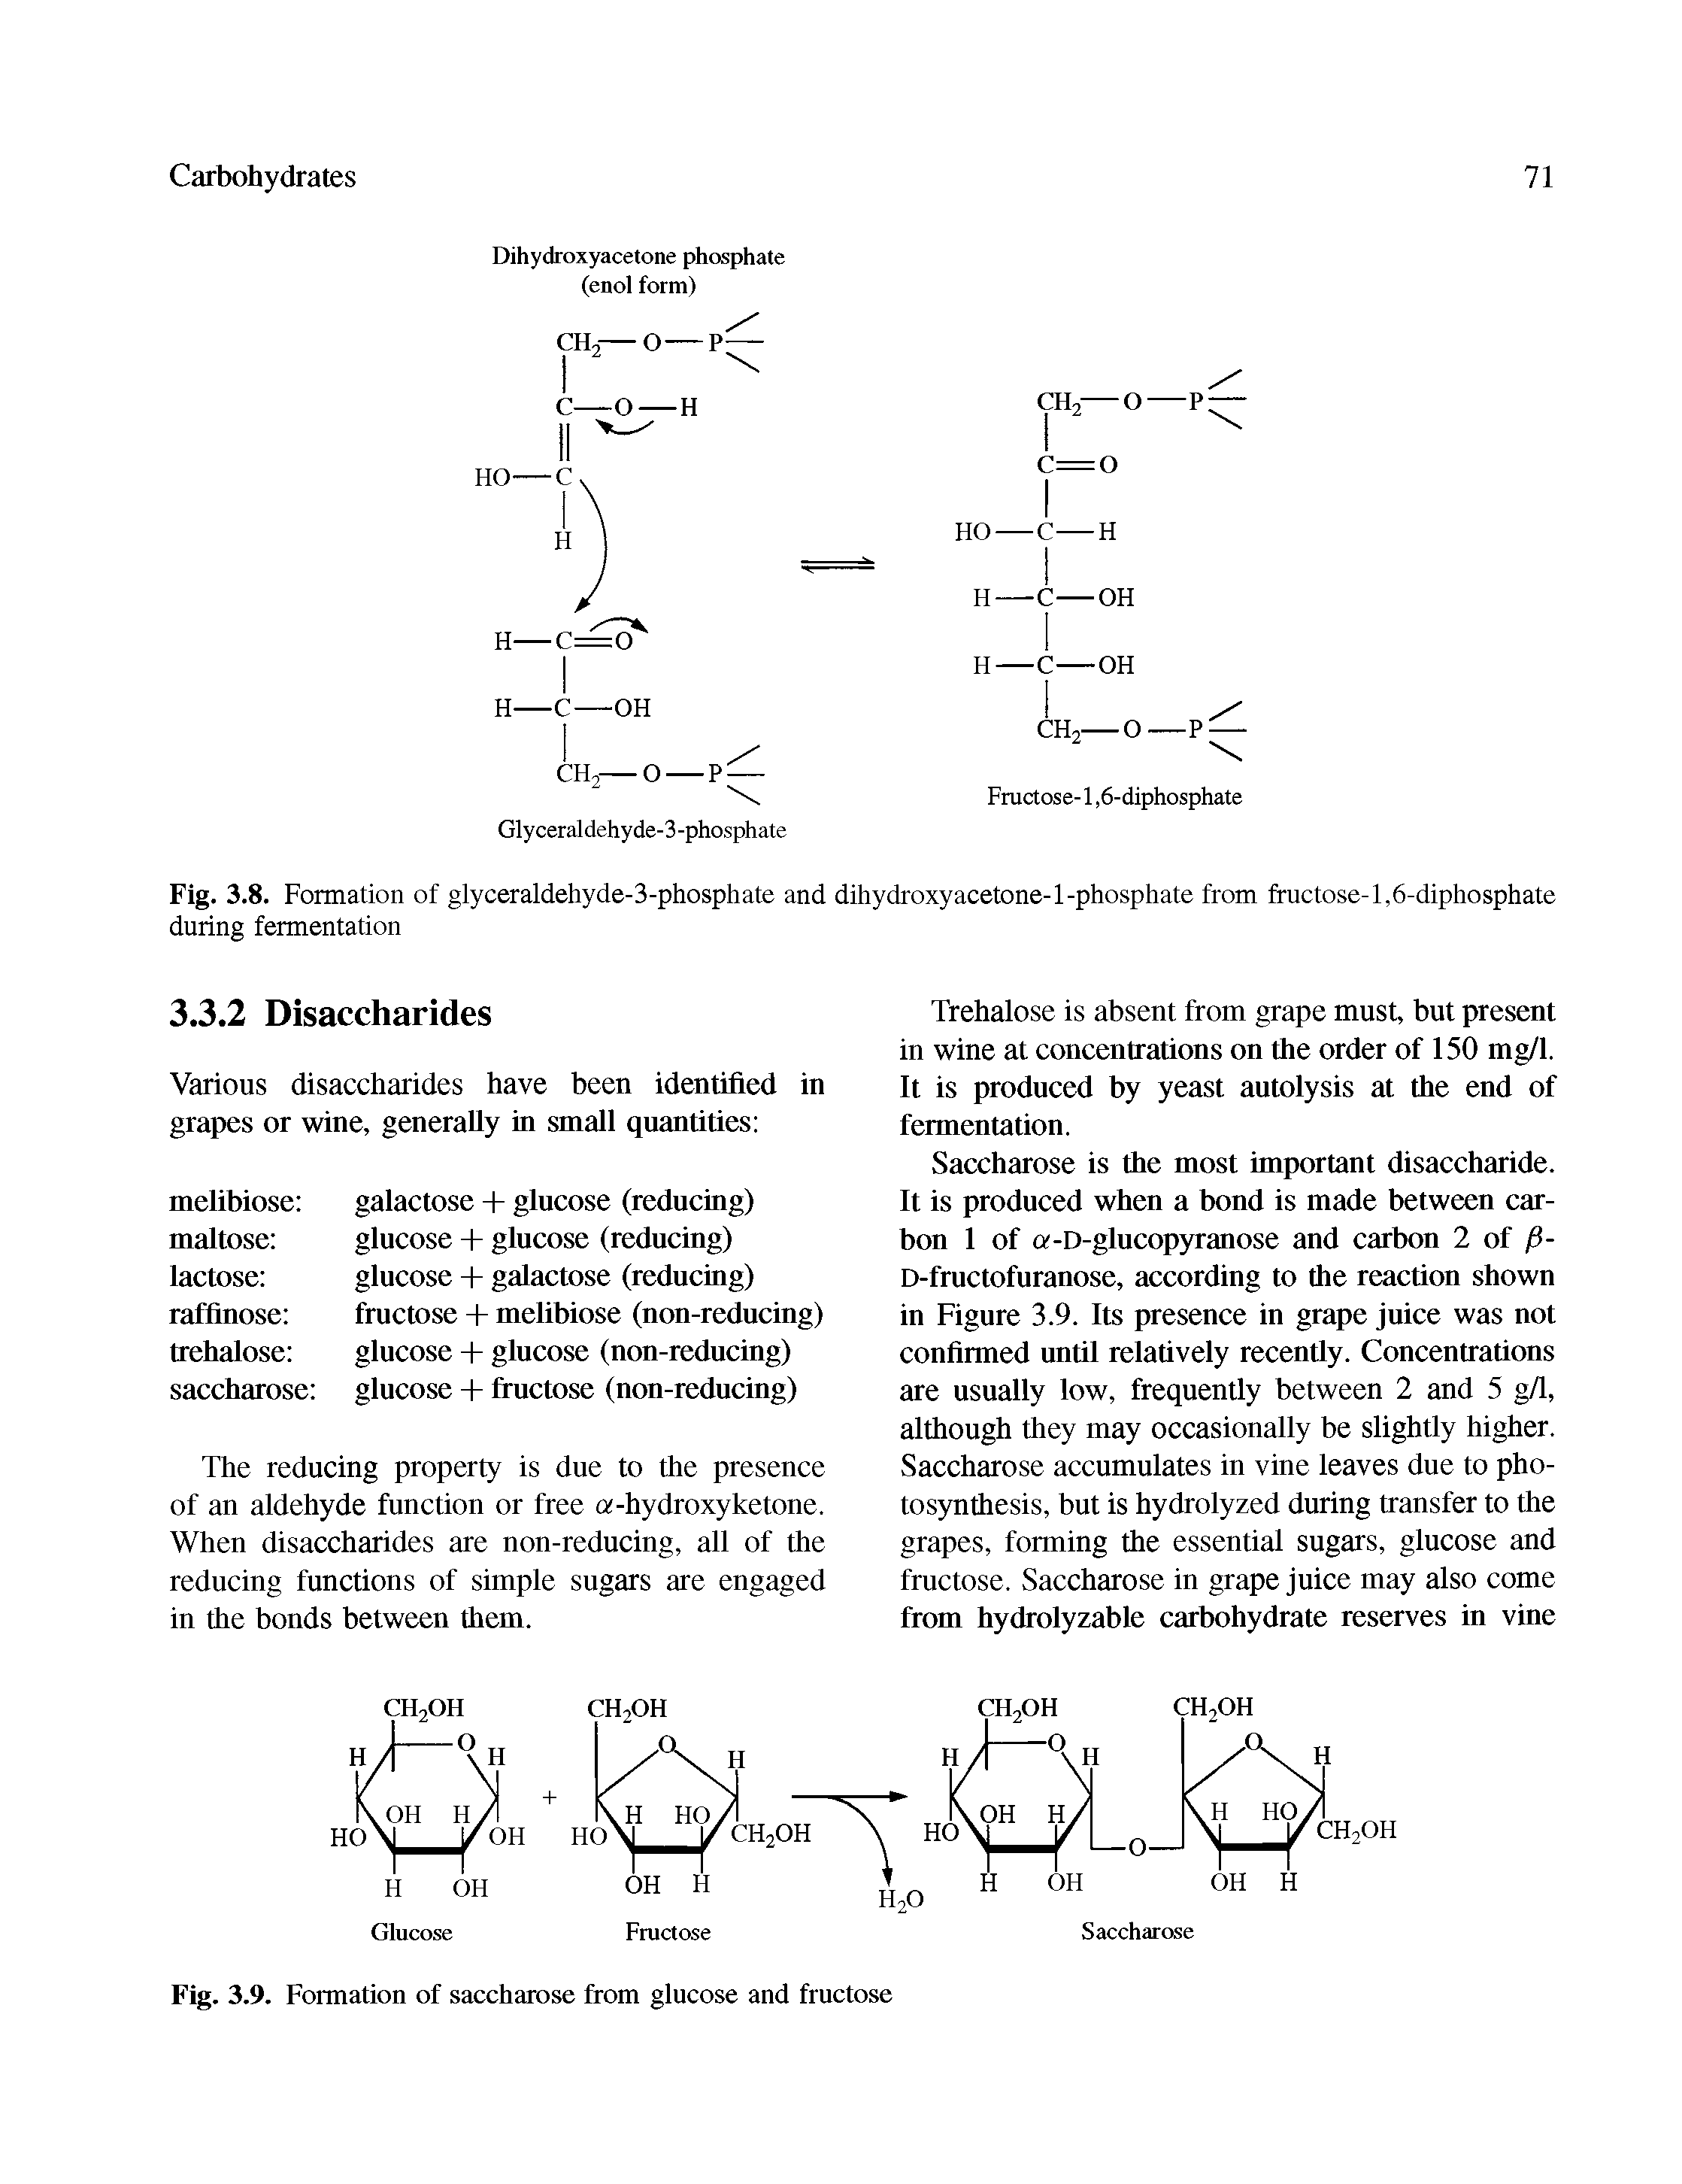 Fig. 3.8. Formation of glyceraldehyde-3-phosphate and dihydroxyacetone-1-phosphate from fructose-1,6-diphosphate during fermentation...